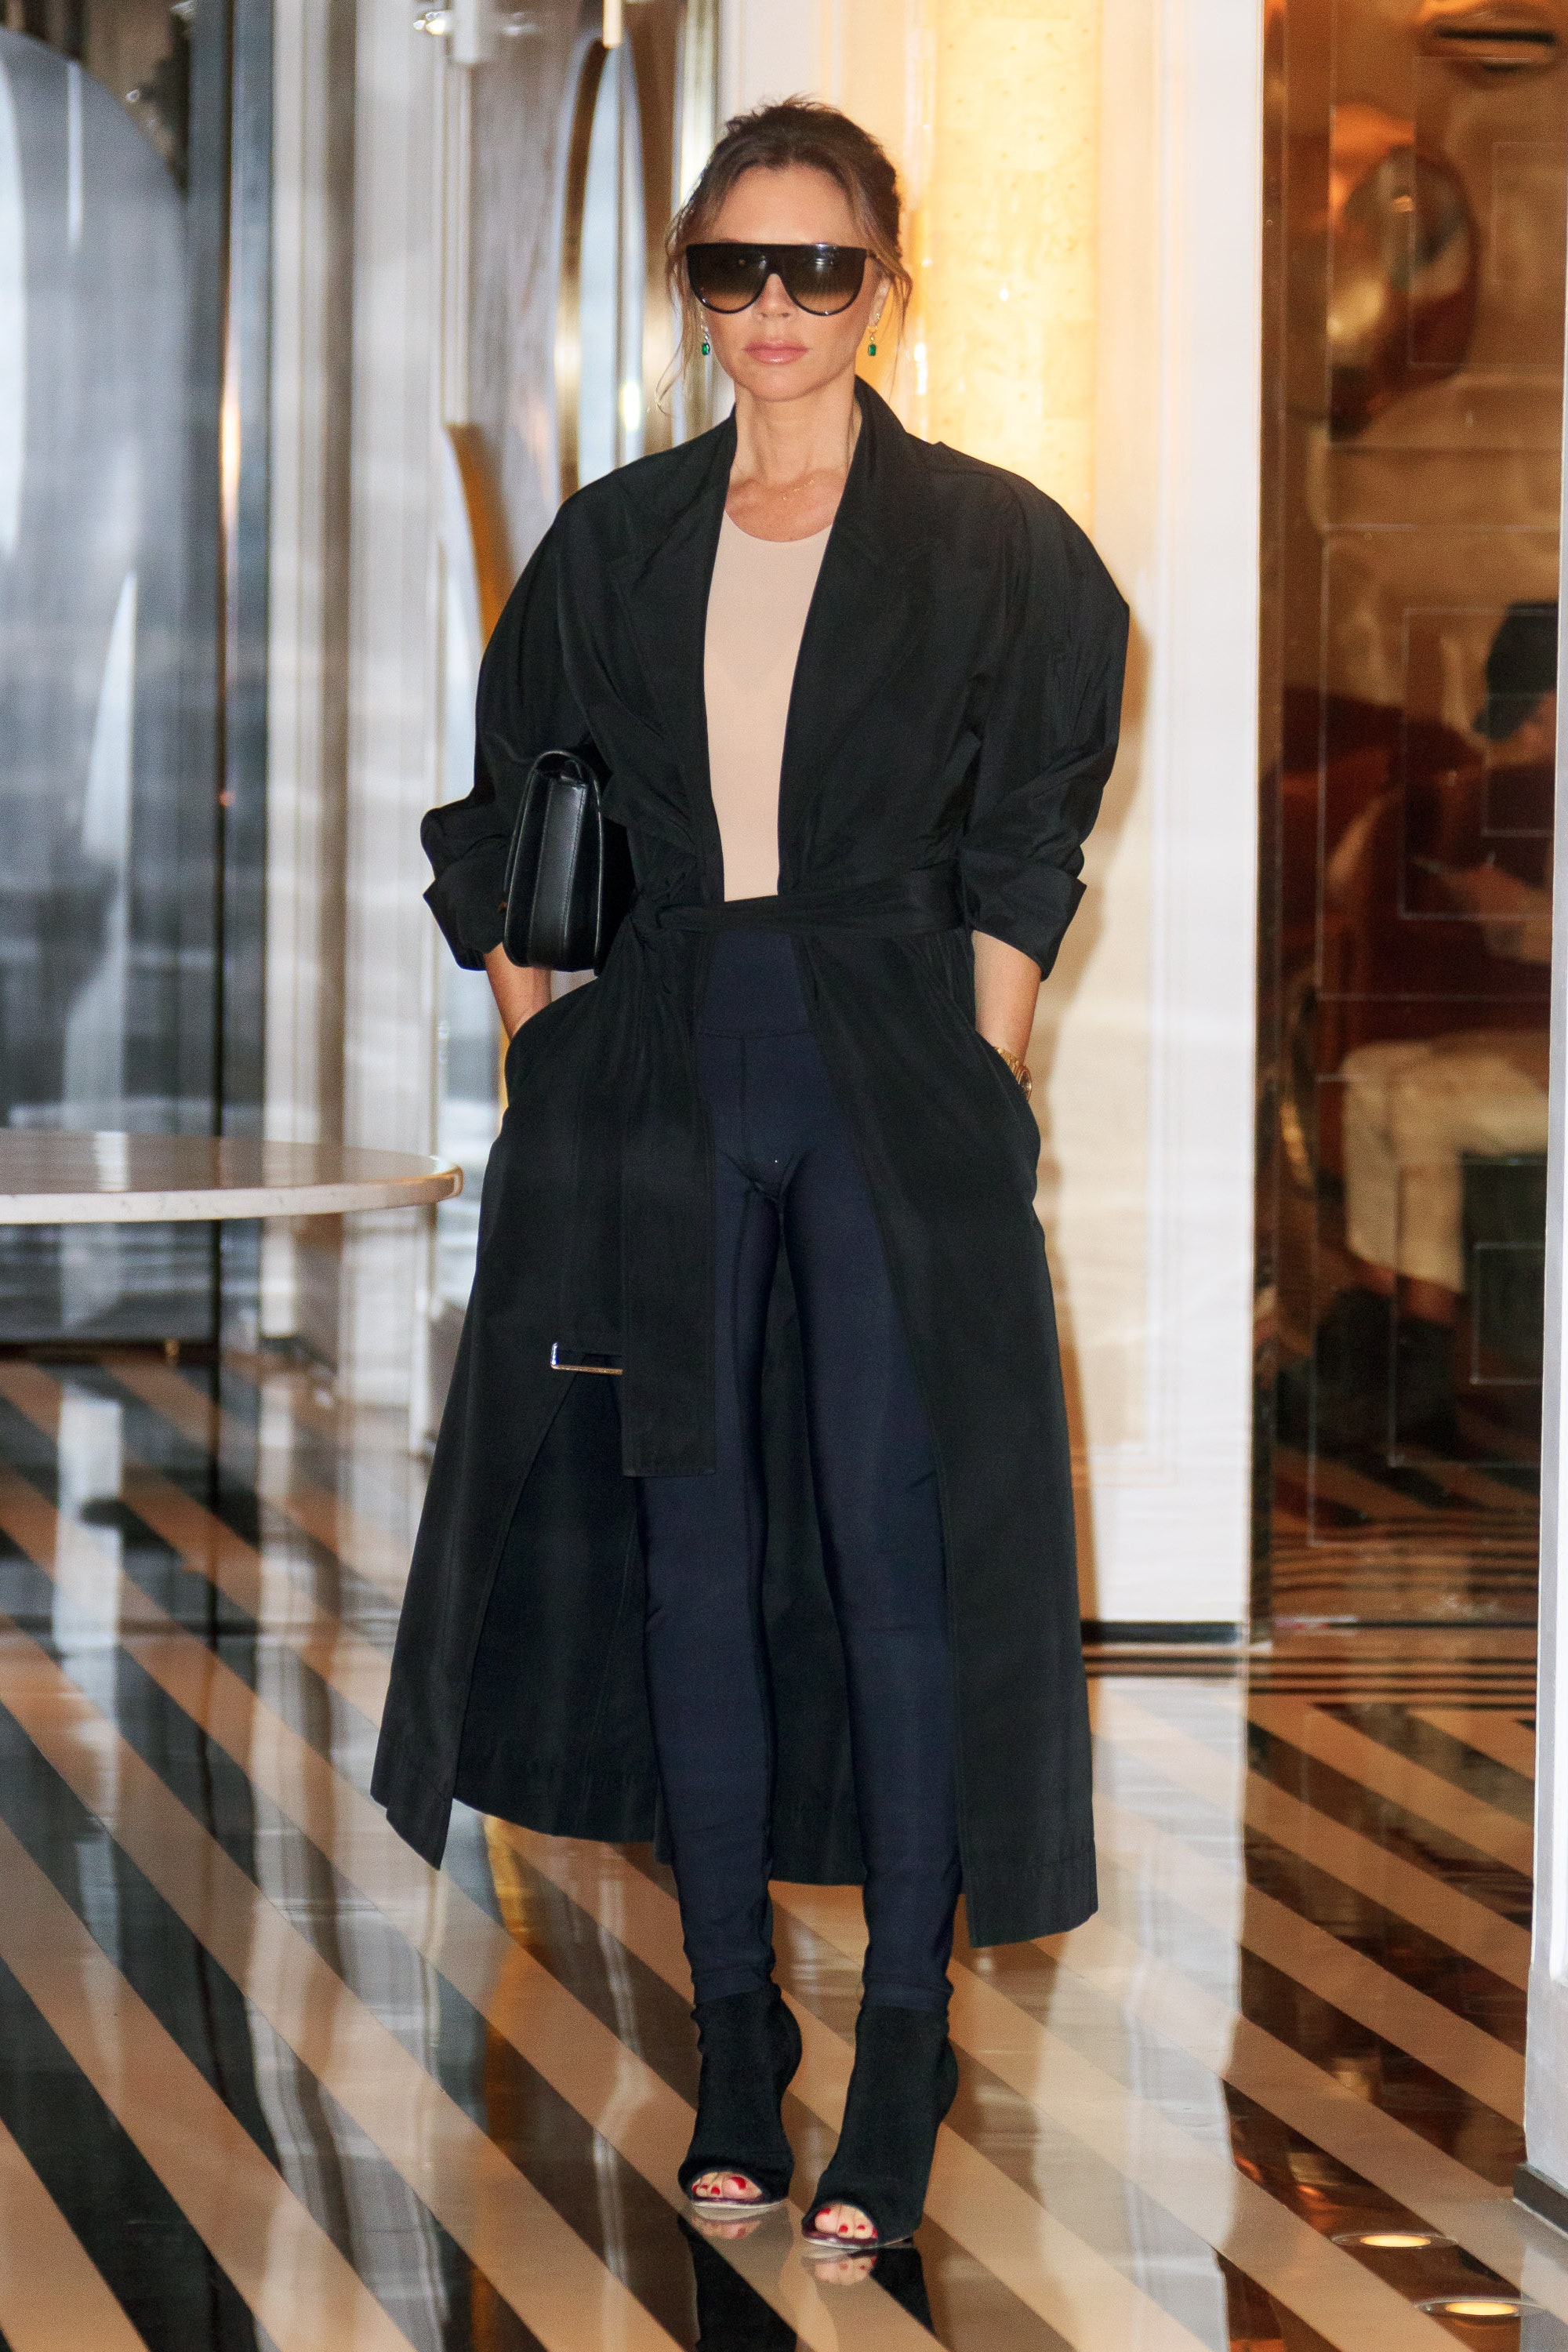 NEW YORK NY  MAY 11  Victoria Beckham leaves her hotel on May 11 2019 in New York City.